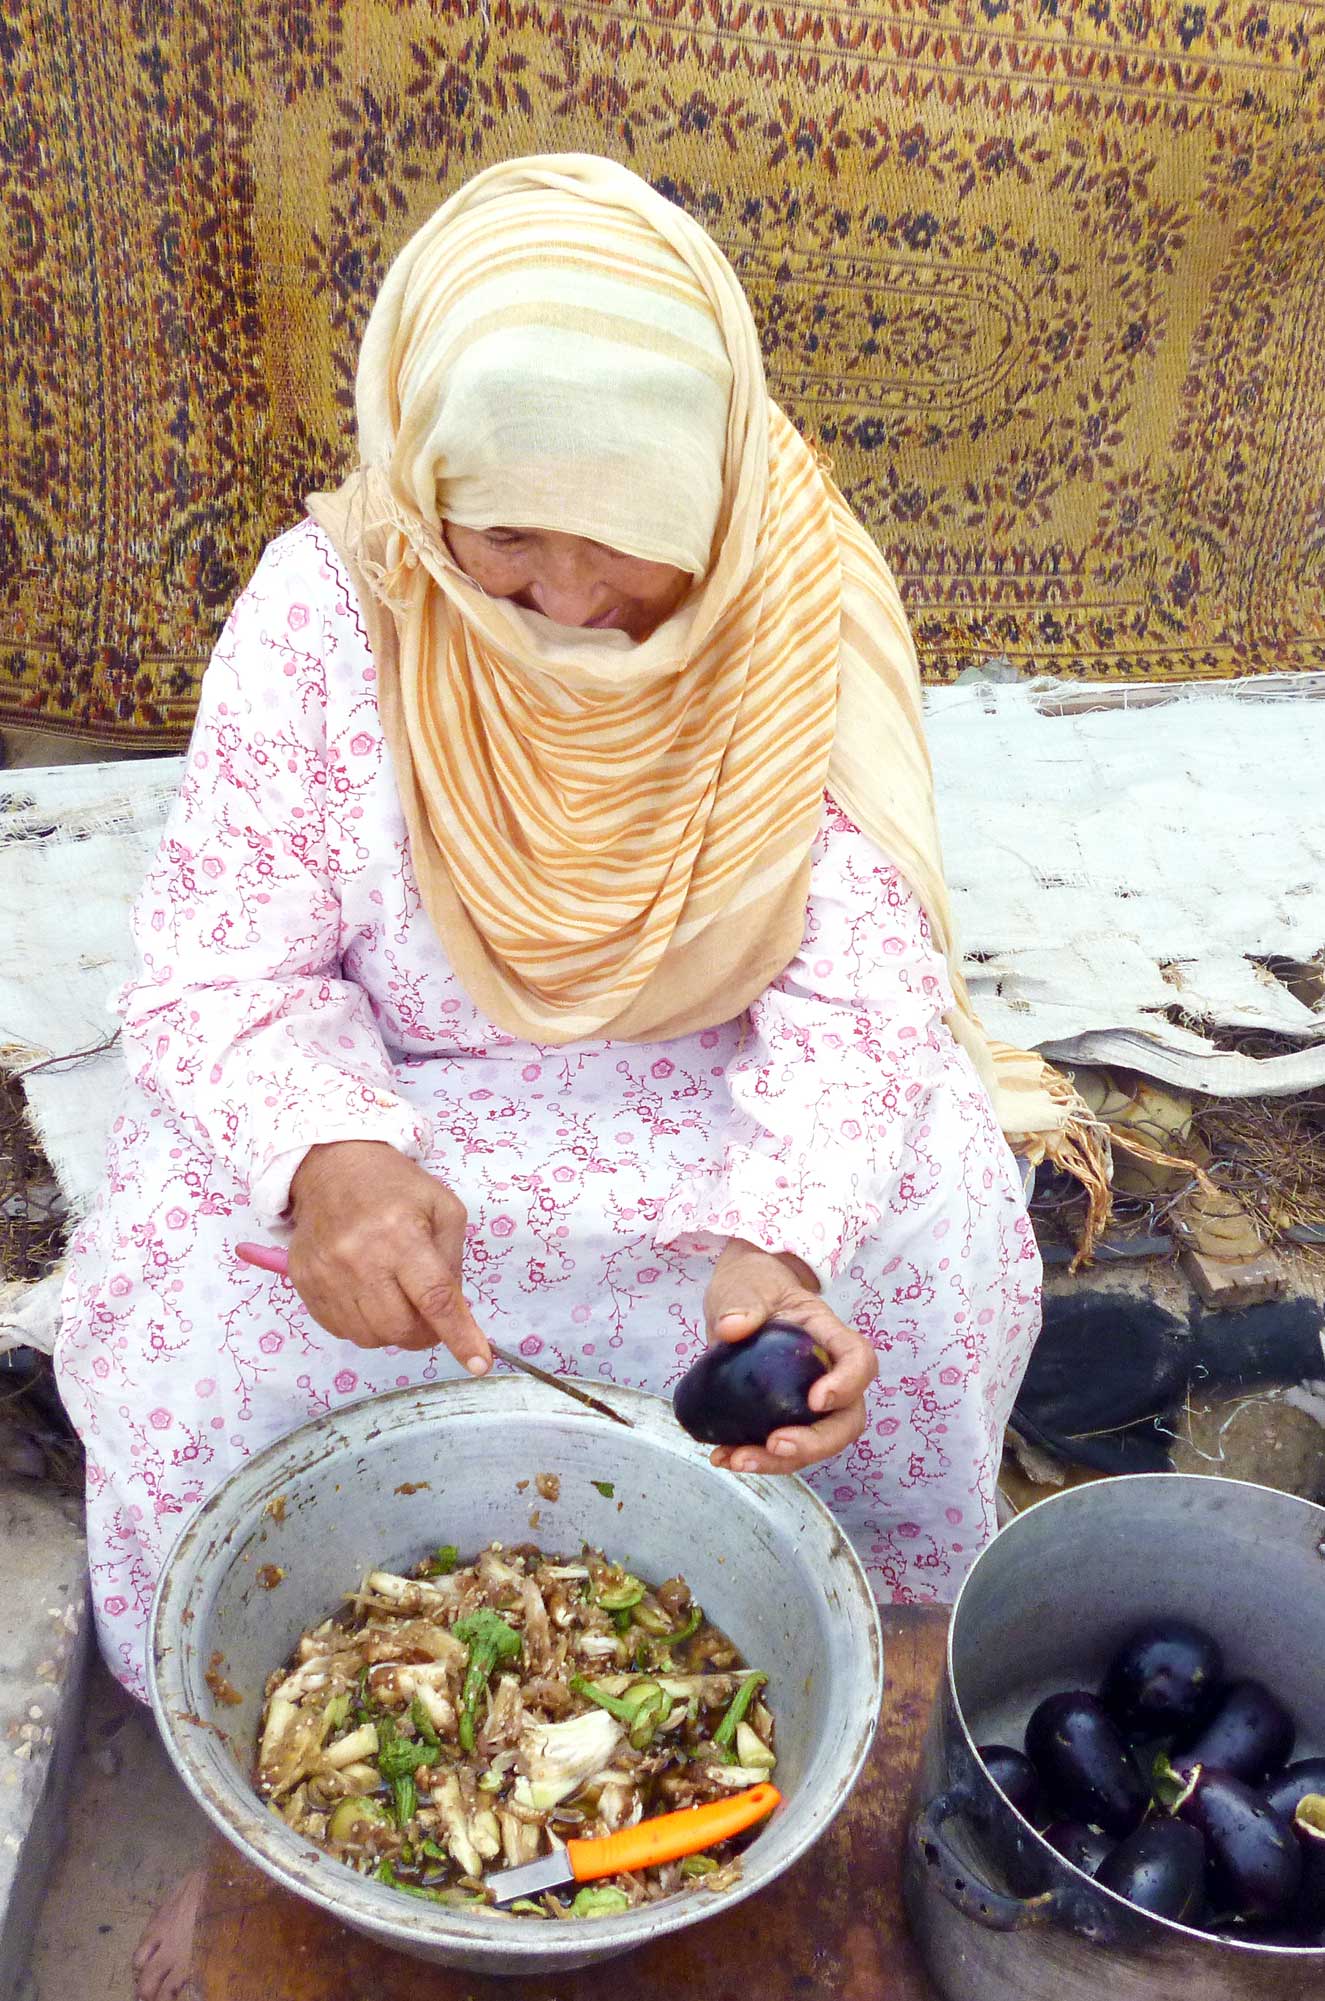 Safia hollows out each eggplant to prepare a traditional Palestinian meal.